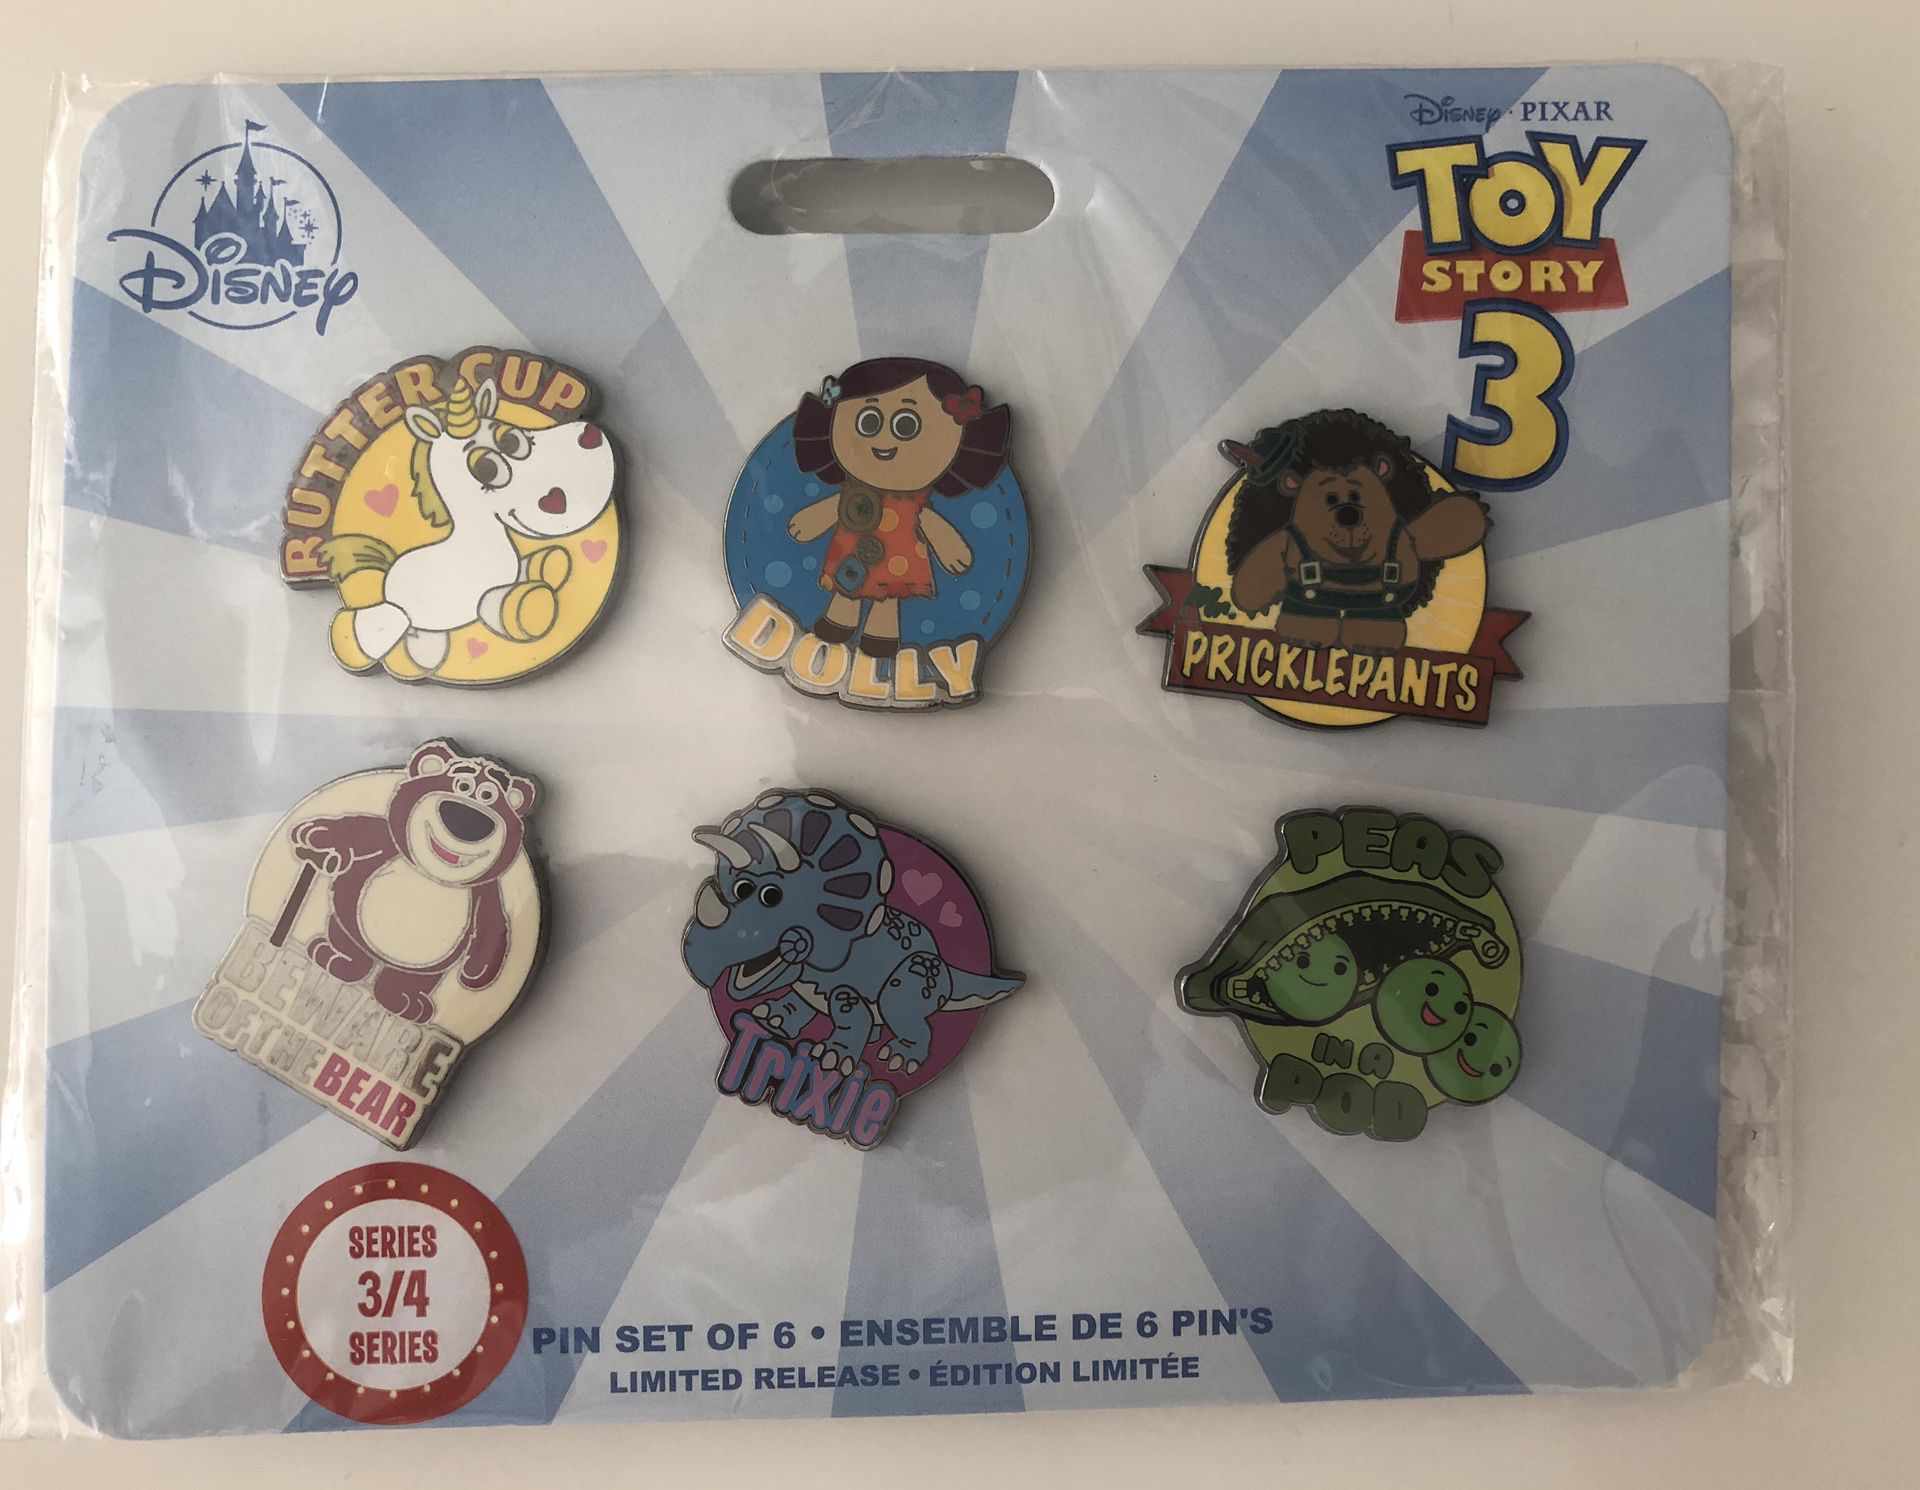 Toy Story 3 Pin Set Of 6 - Limited Release Disney Pixar Buttercup Lotso Trixie